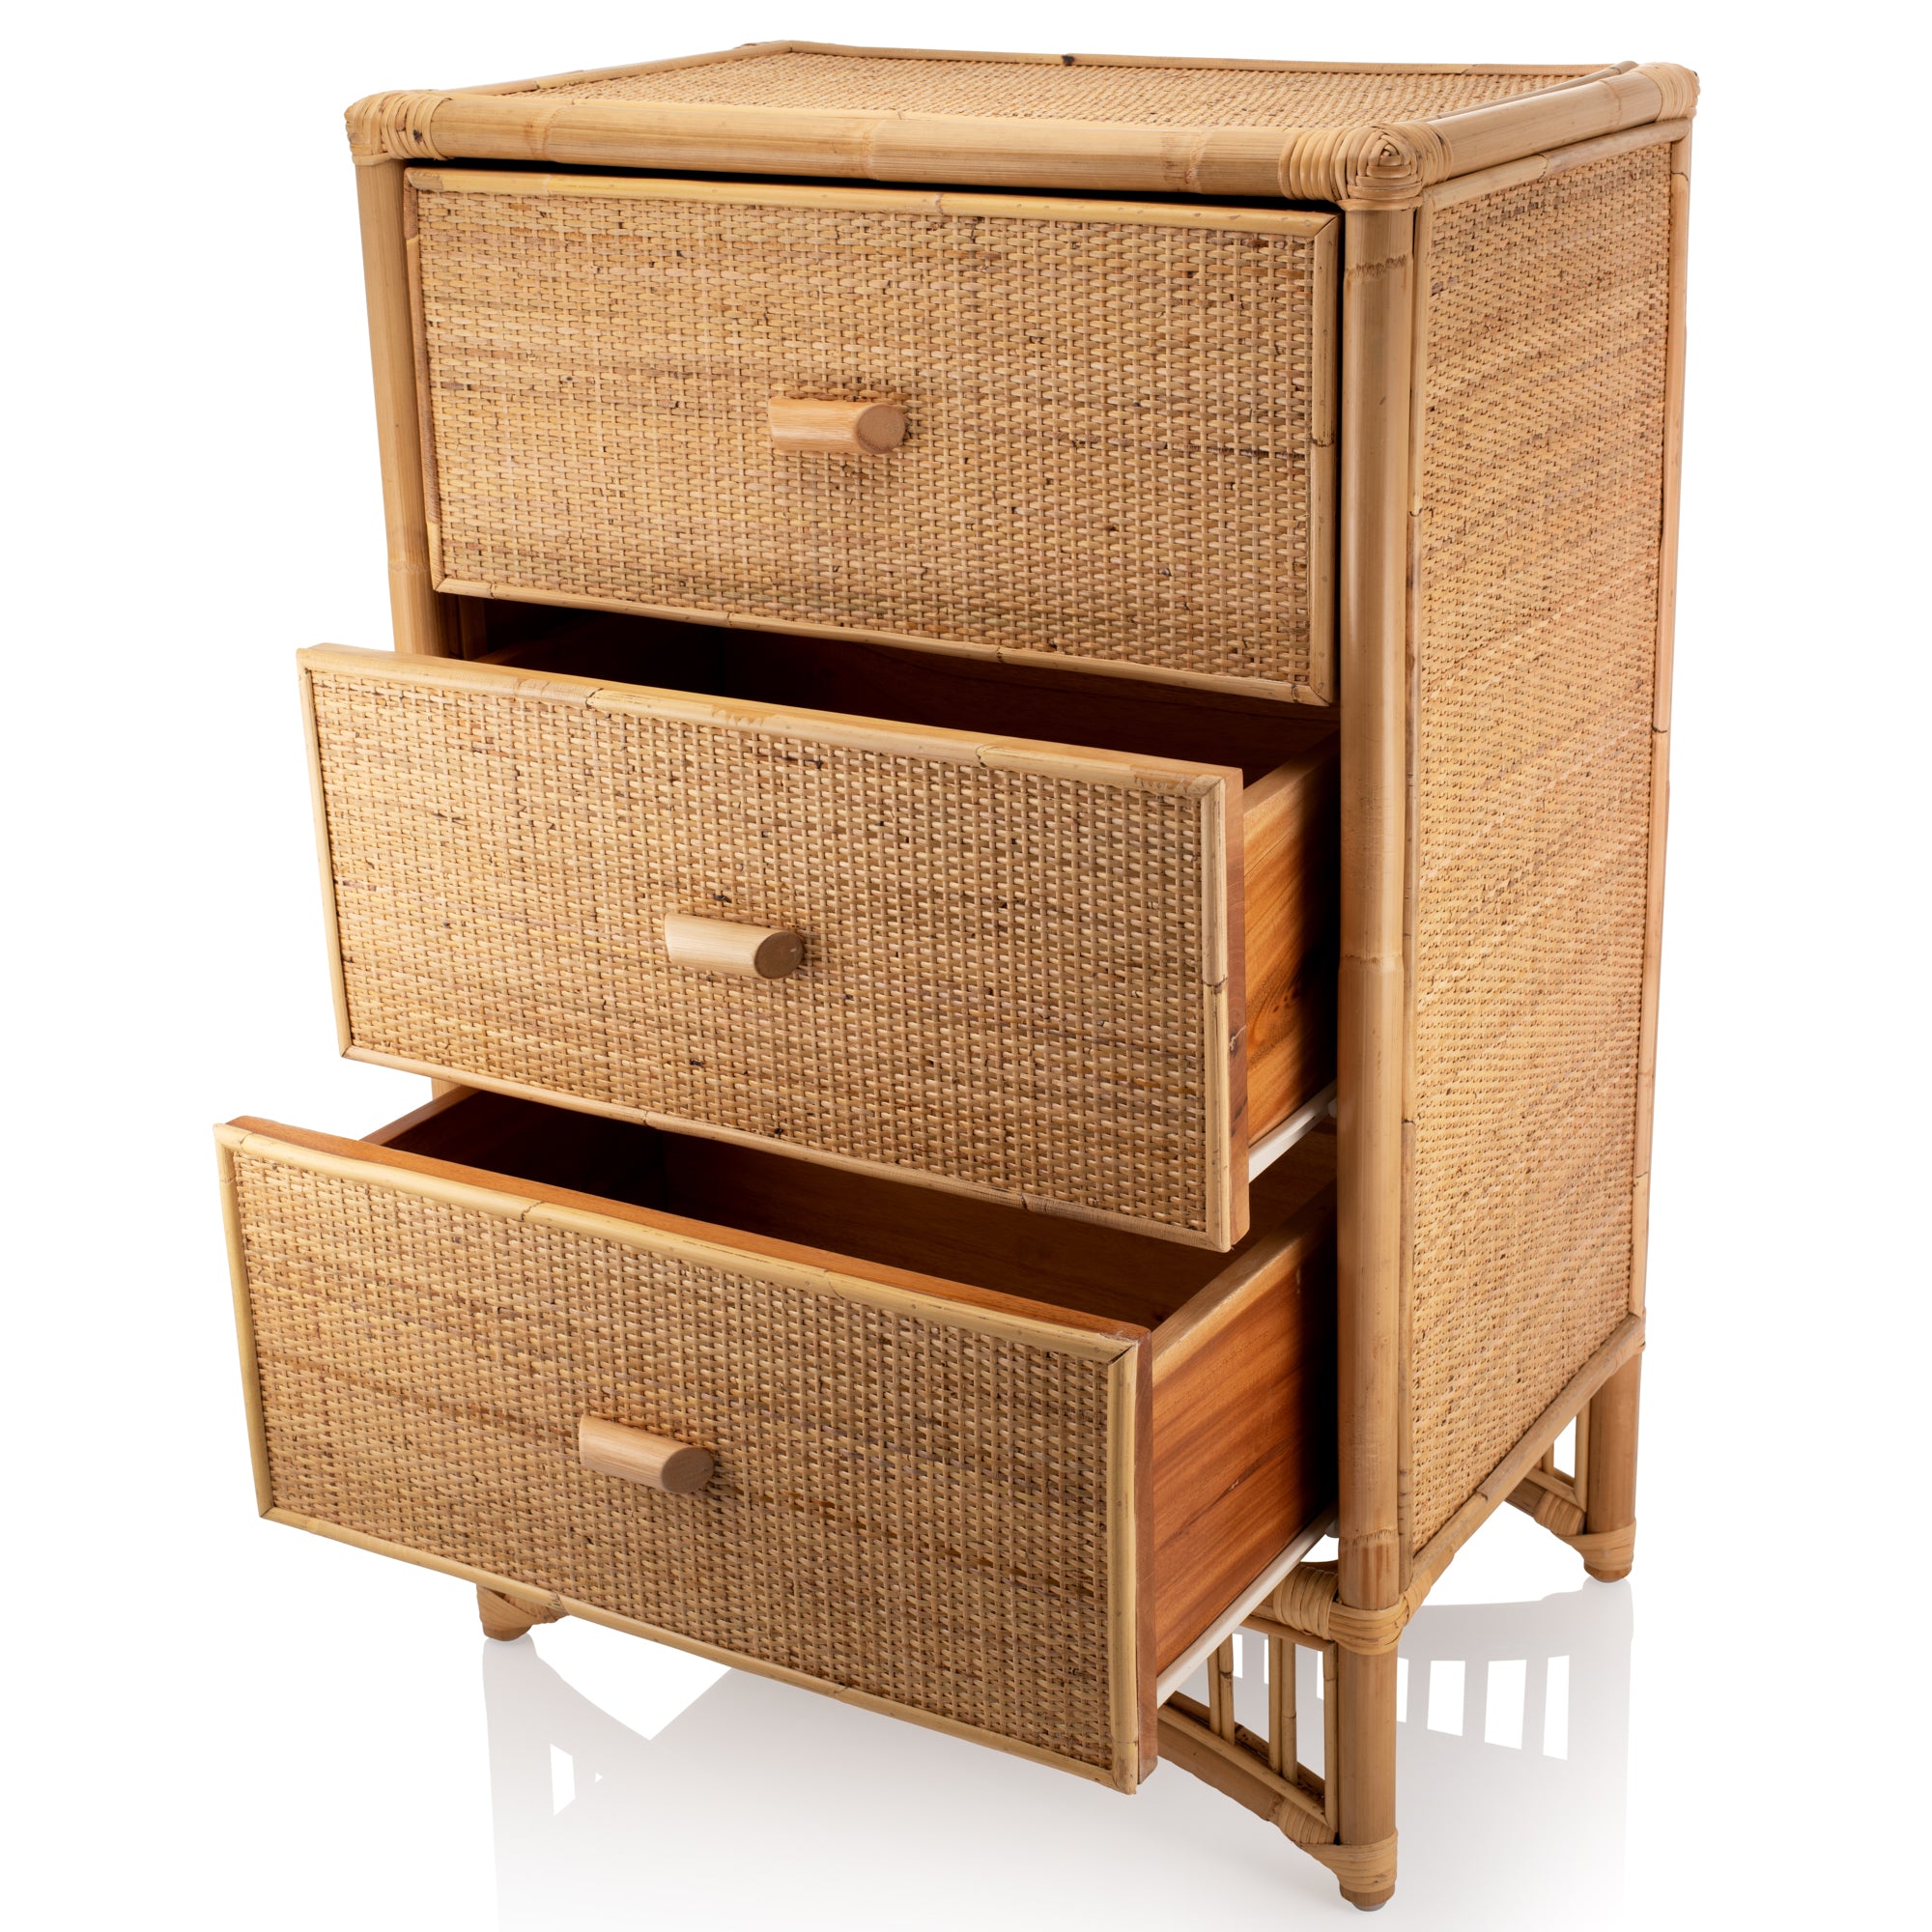 Iris Natural Rattan Chest of 3 drawers - The Rattan Company